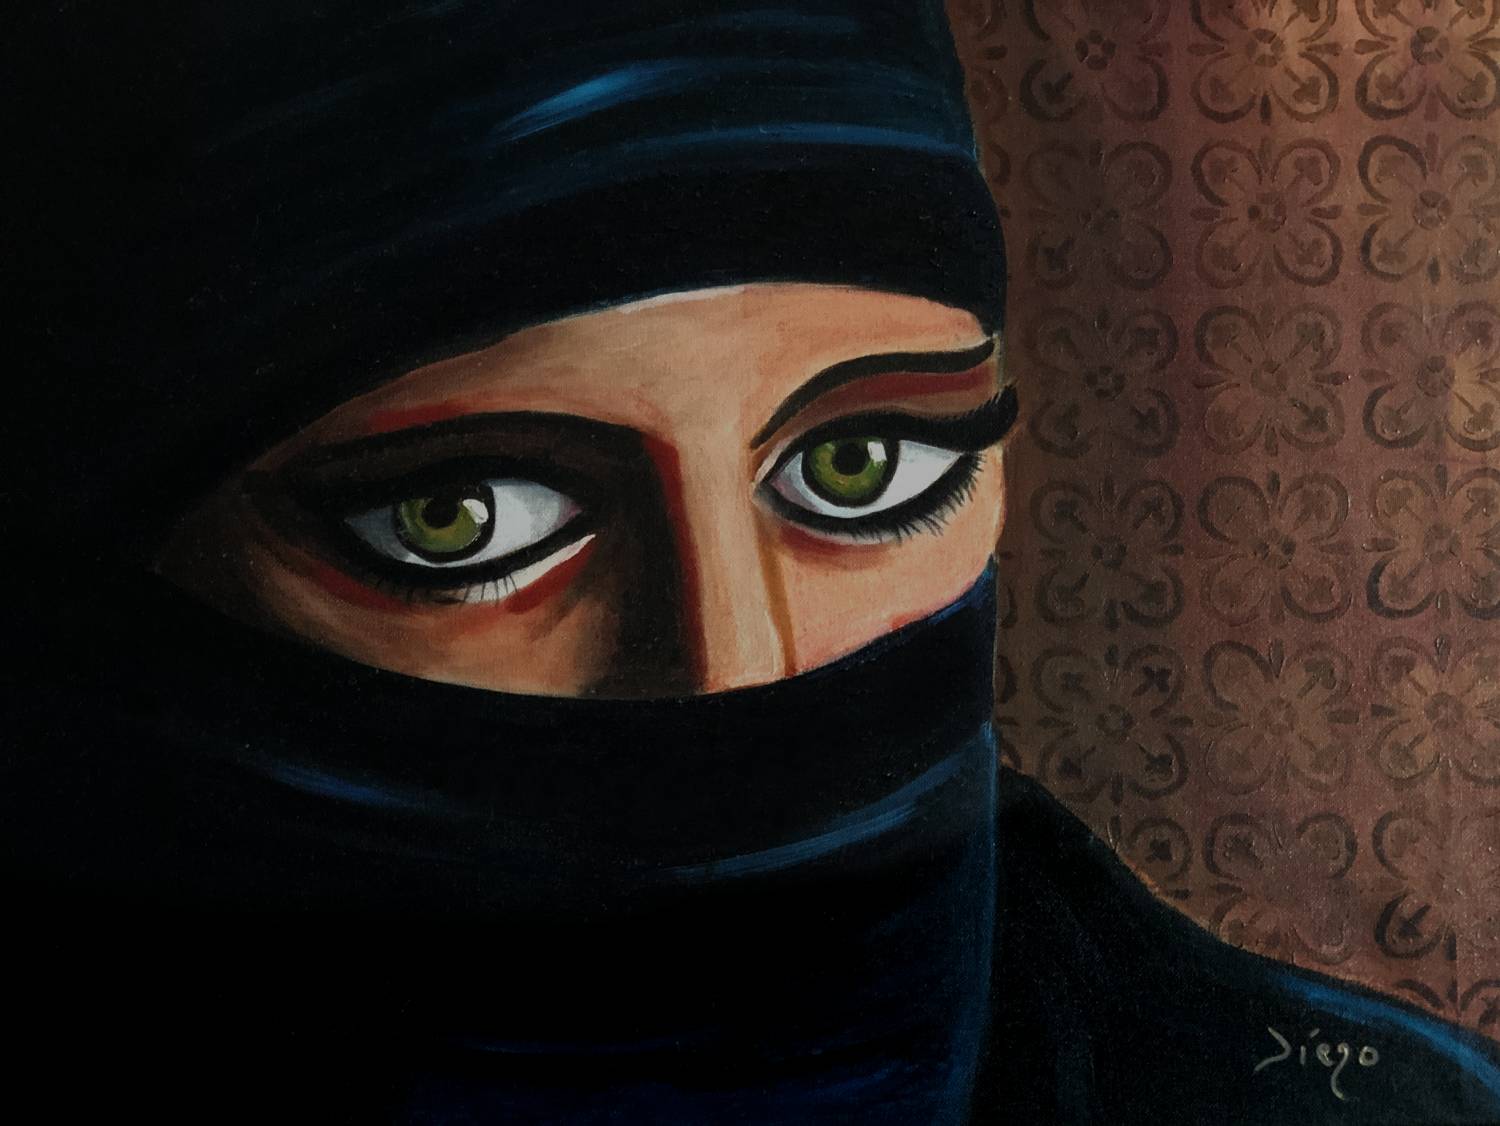 "Shari'a" Oil on canvas by Diego Besozzi